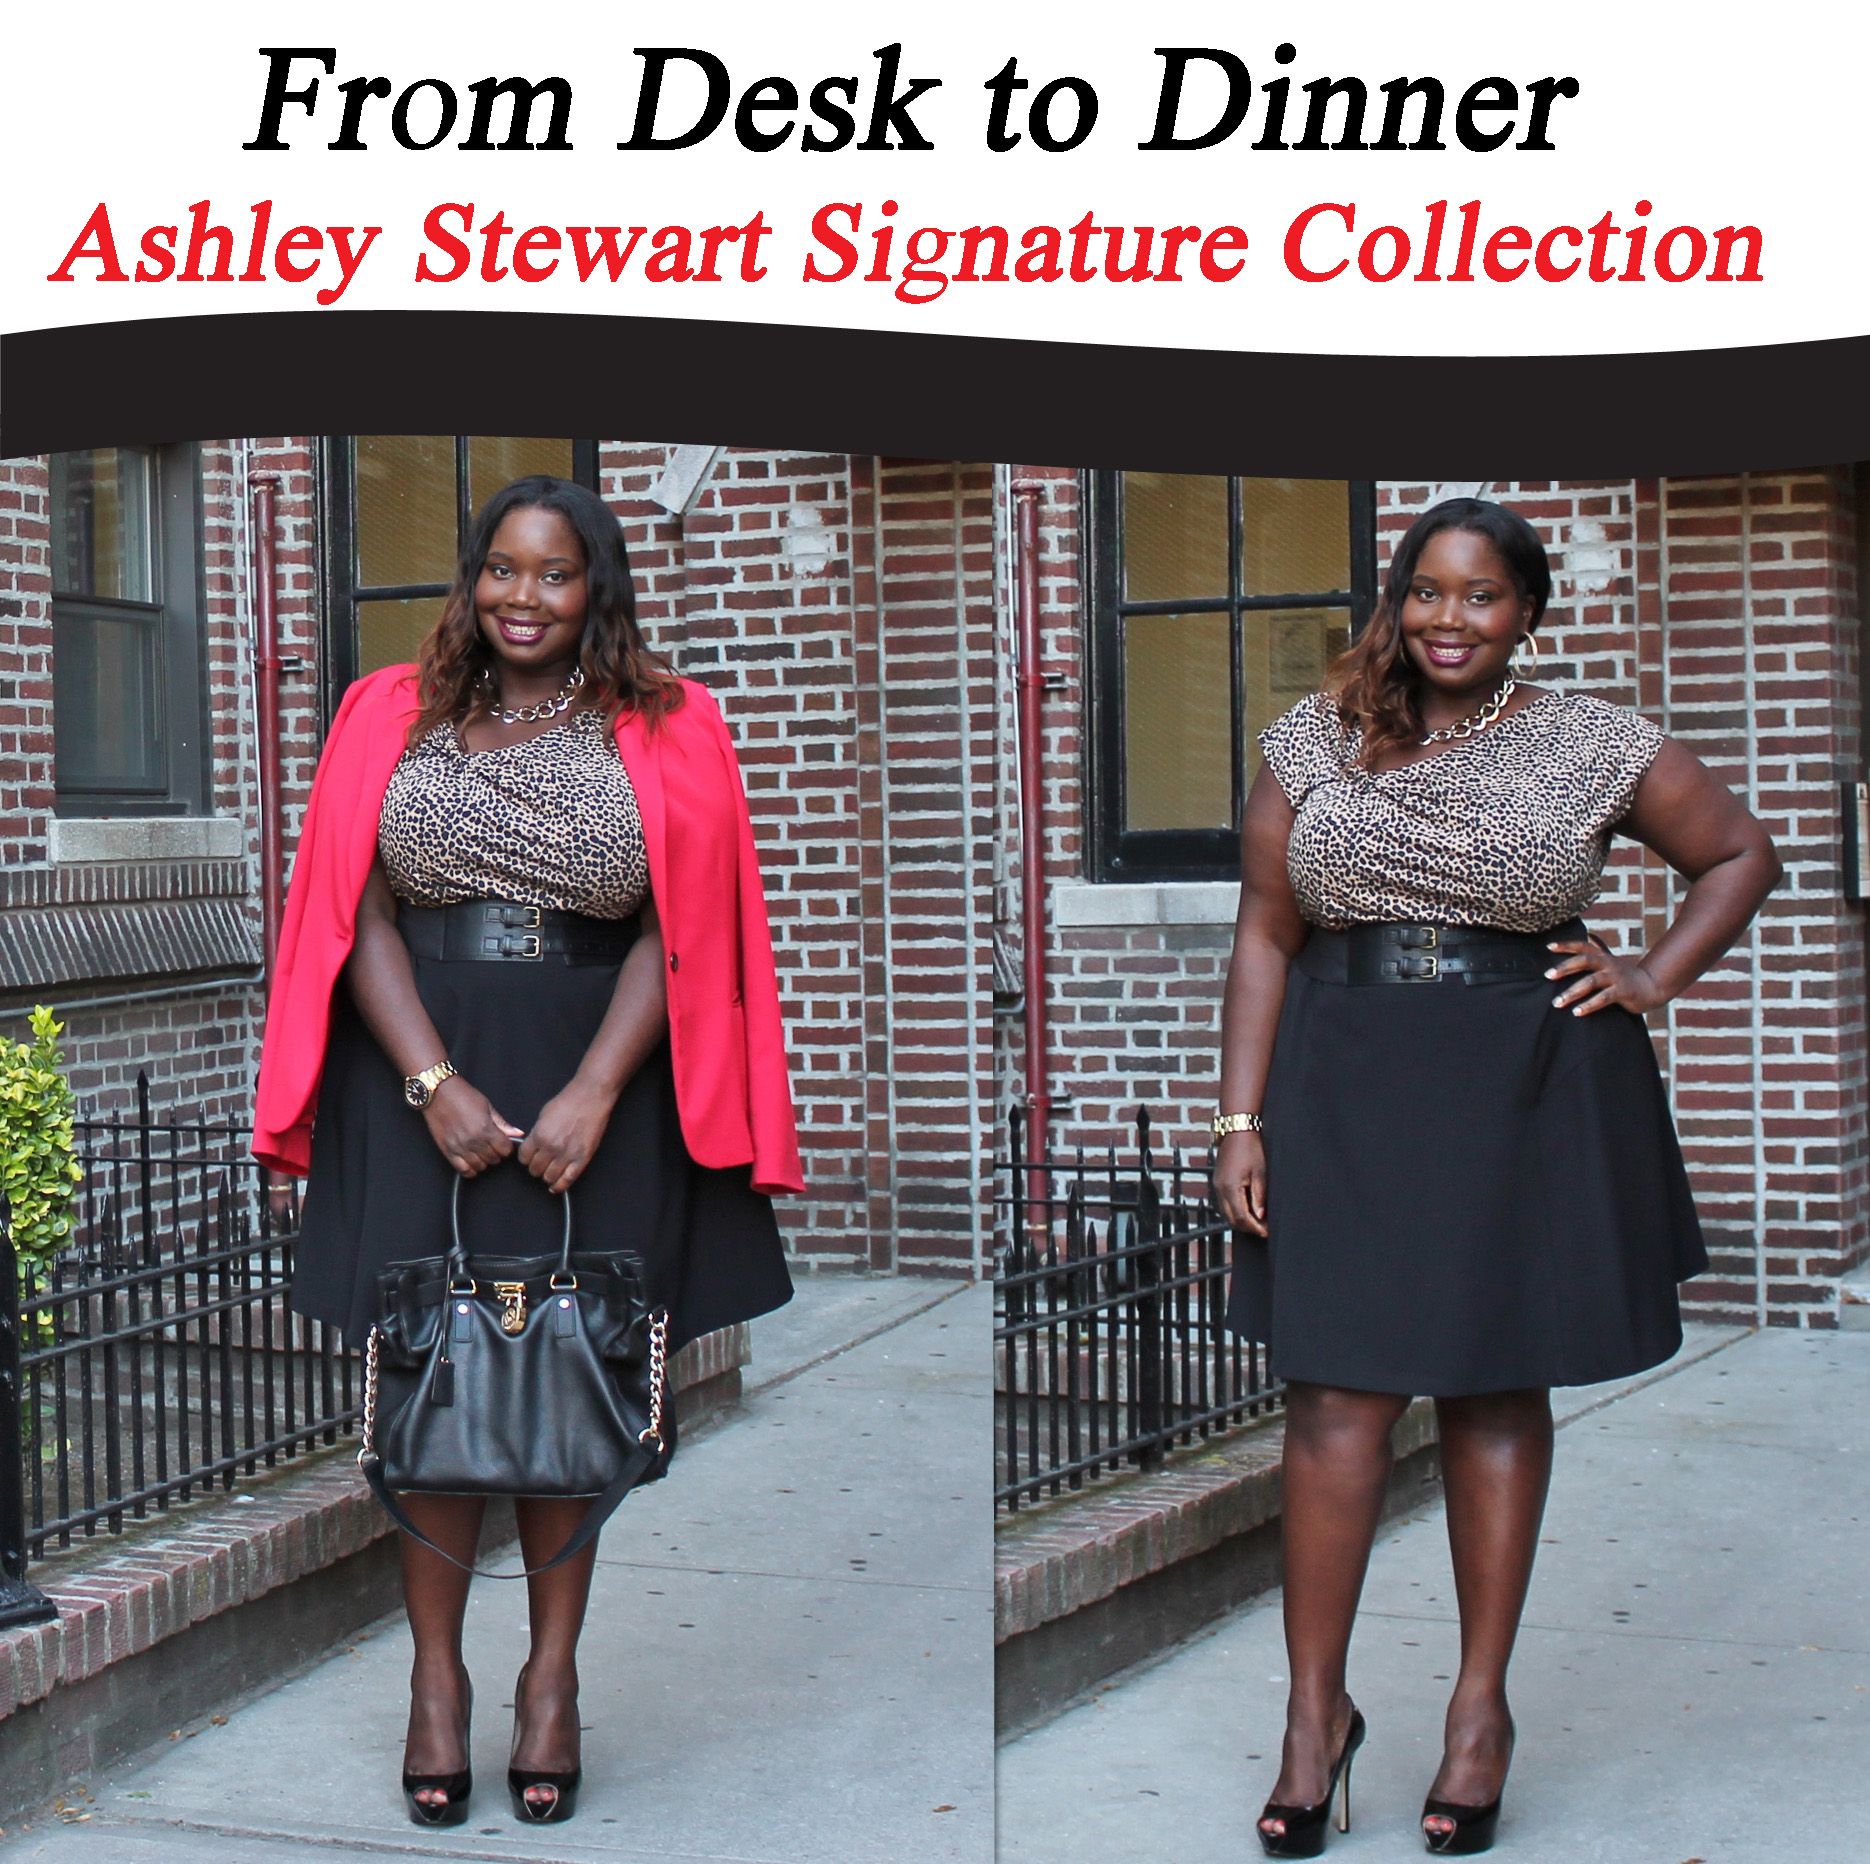 FROM DESK TO DINNER IN ASHLEY STEWART SIGNATURE COLLECTION - Stylish Curves